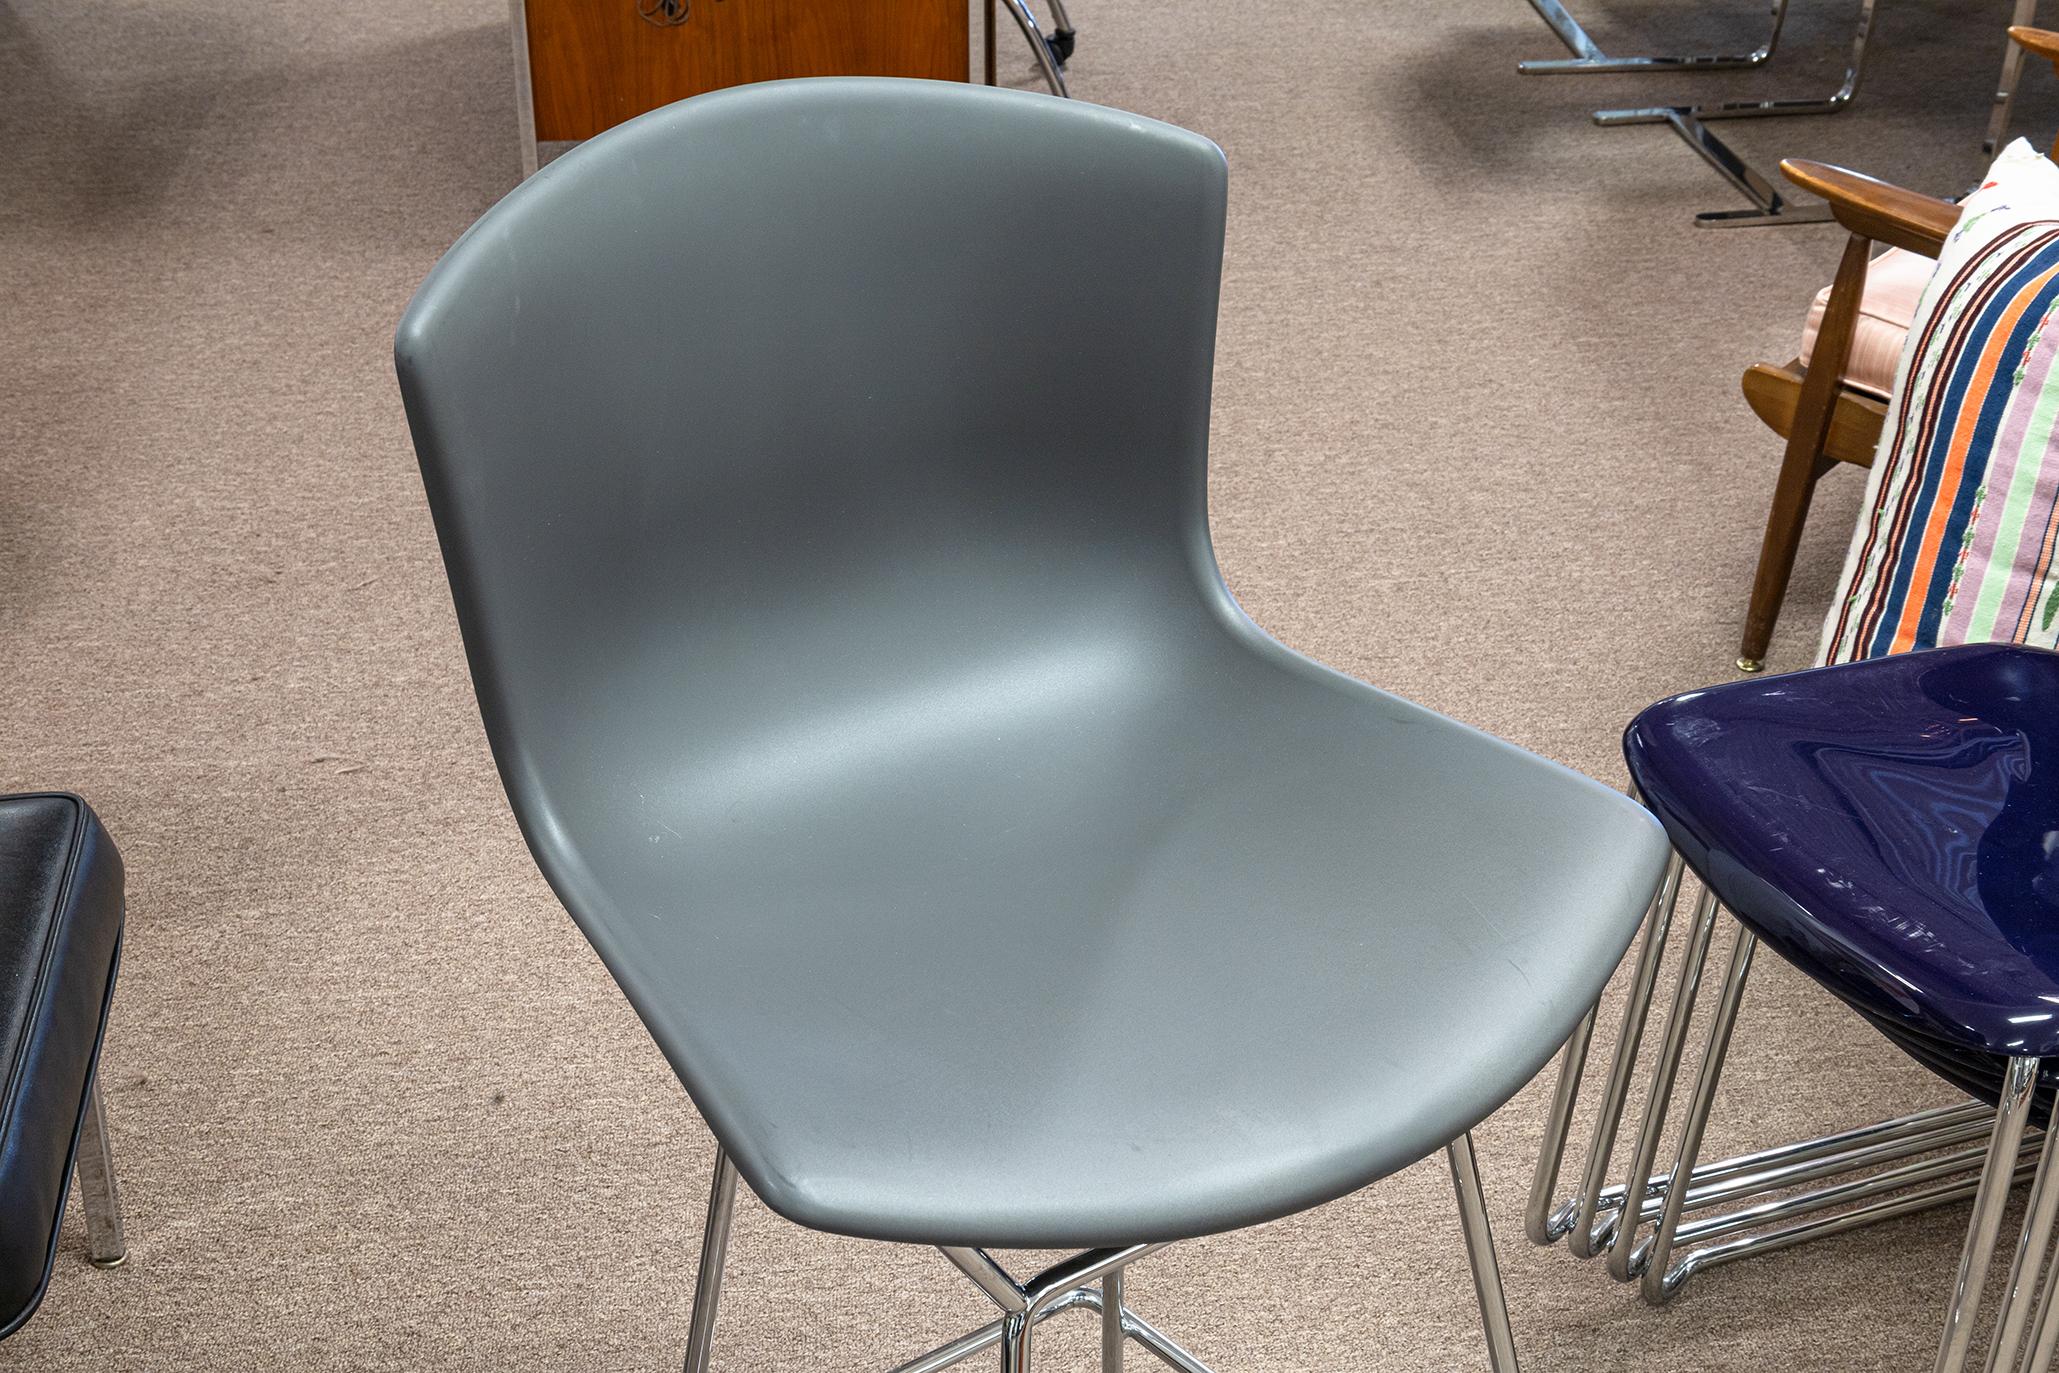 A pair of Bertoia for Knoll molded shell counter stools. A lovely pair of contemporary modern stools from Knoll's Bertoia collection. These two stools feature the iconic shell seat design in a muted grey color. They sit tall on rectangular chrome